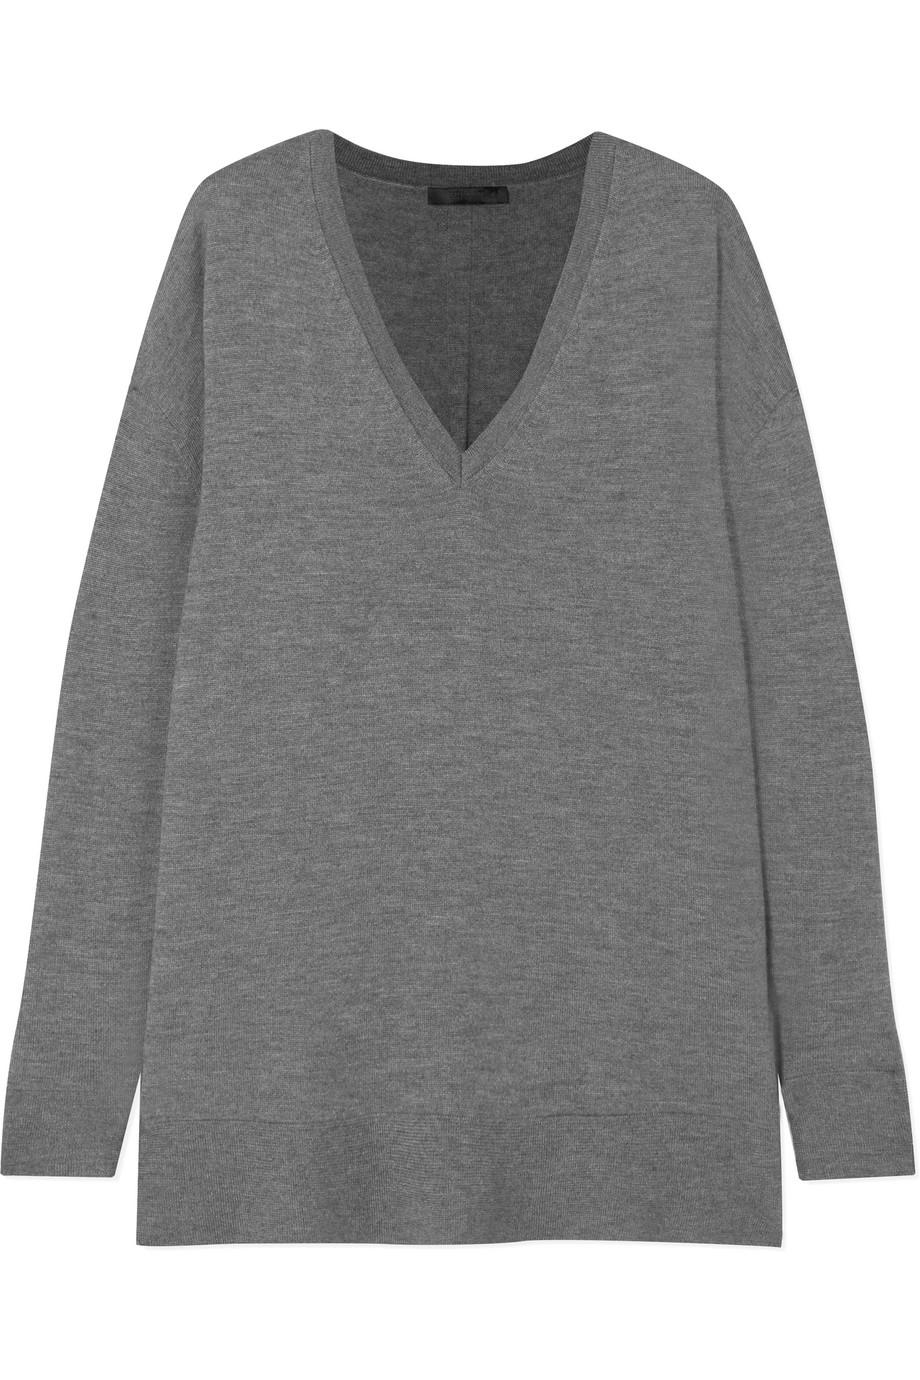 20 Oversize V-Neck Sweaters to Buy Now | Who What Wear UK